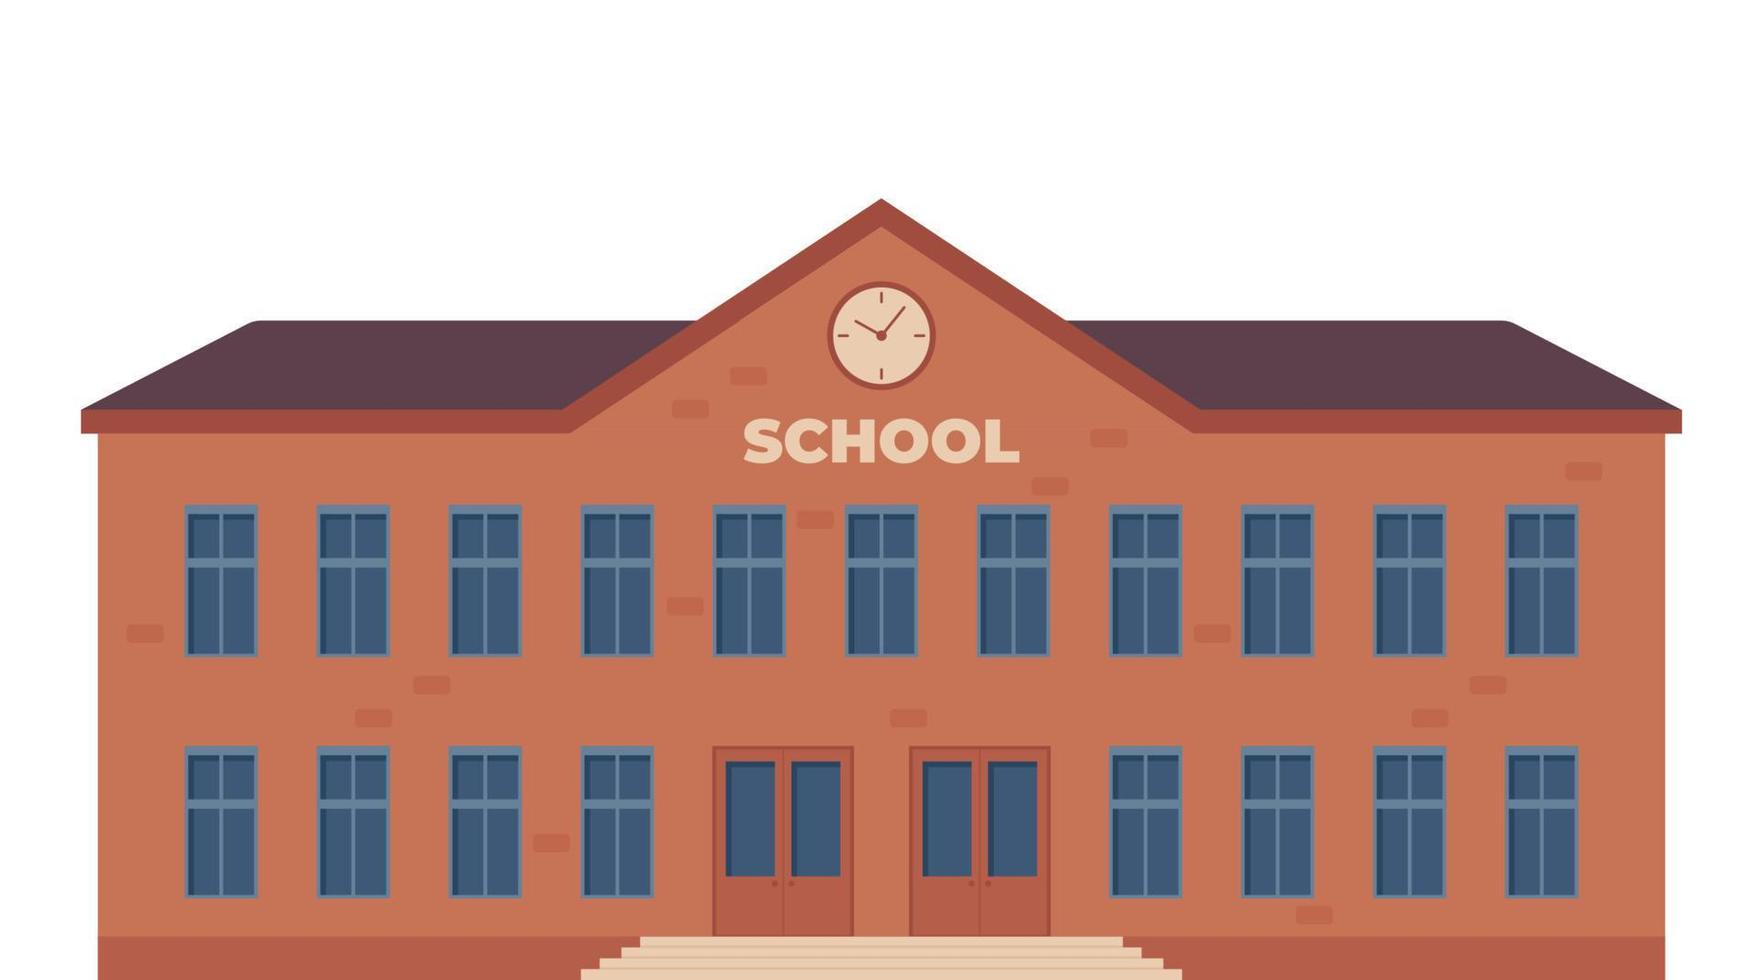 Modern School Building Exterior. Welcome Back To School. Educational architecture, facade of high school building. Design for flyer, banner, card. Vector illustration.